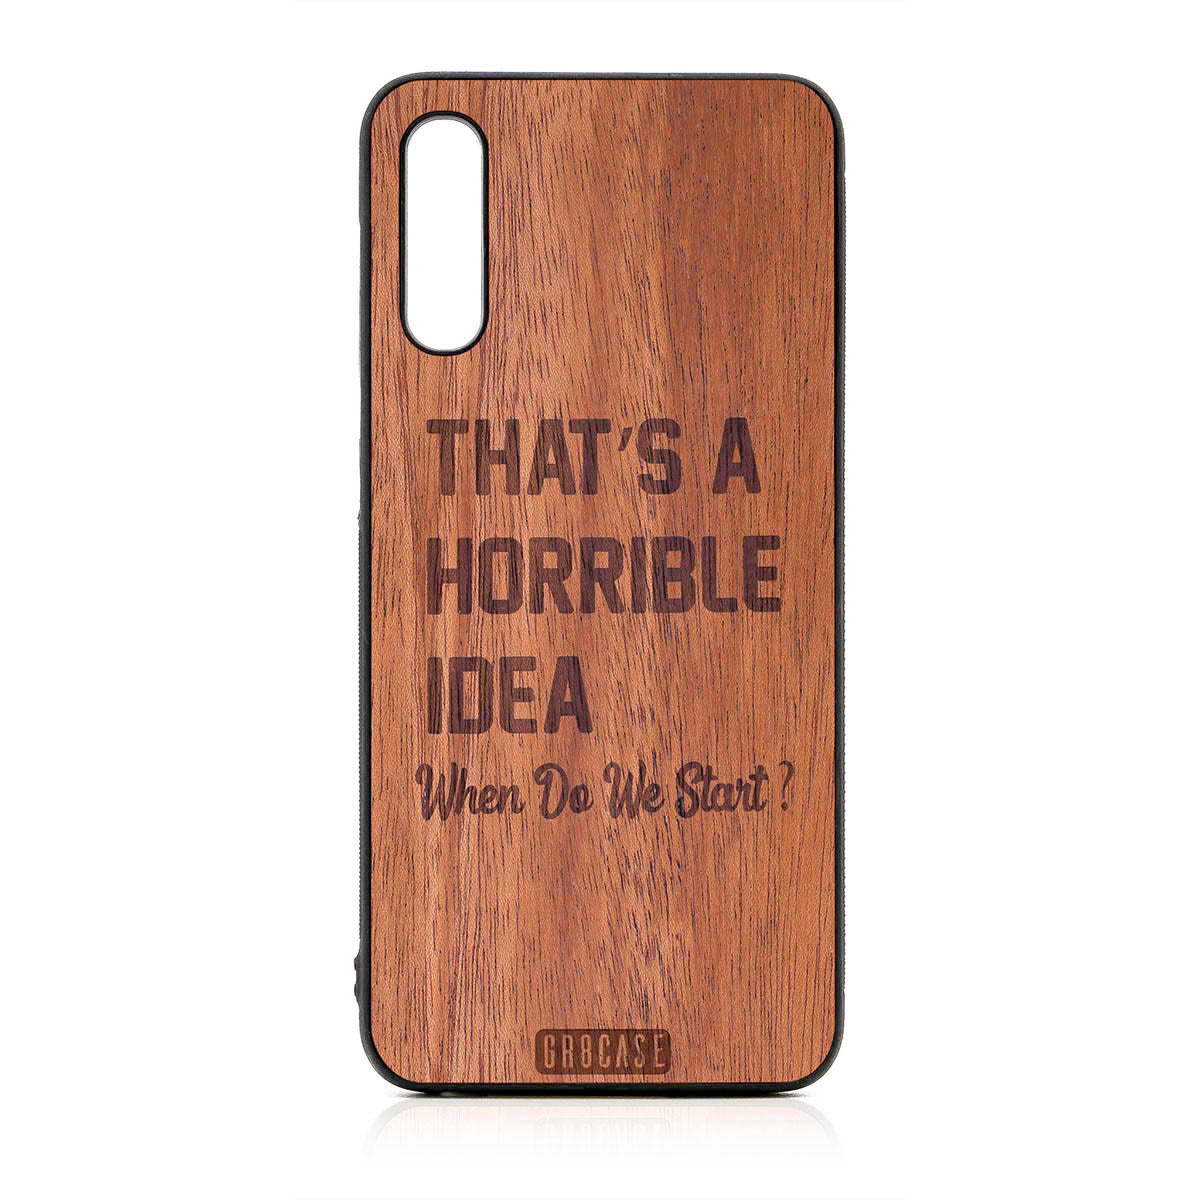 That's A Horrible Idea When Do We Start? Design Wood Case For Samsung Galaxy A50